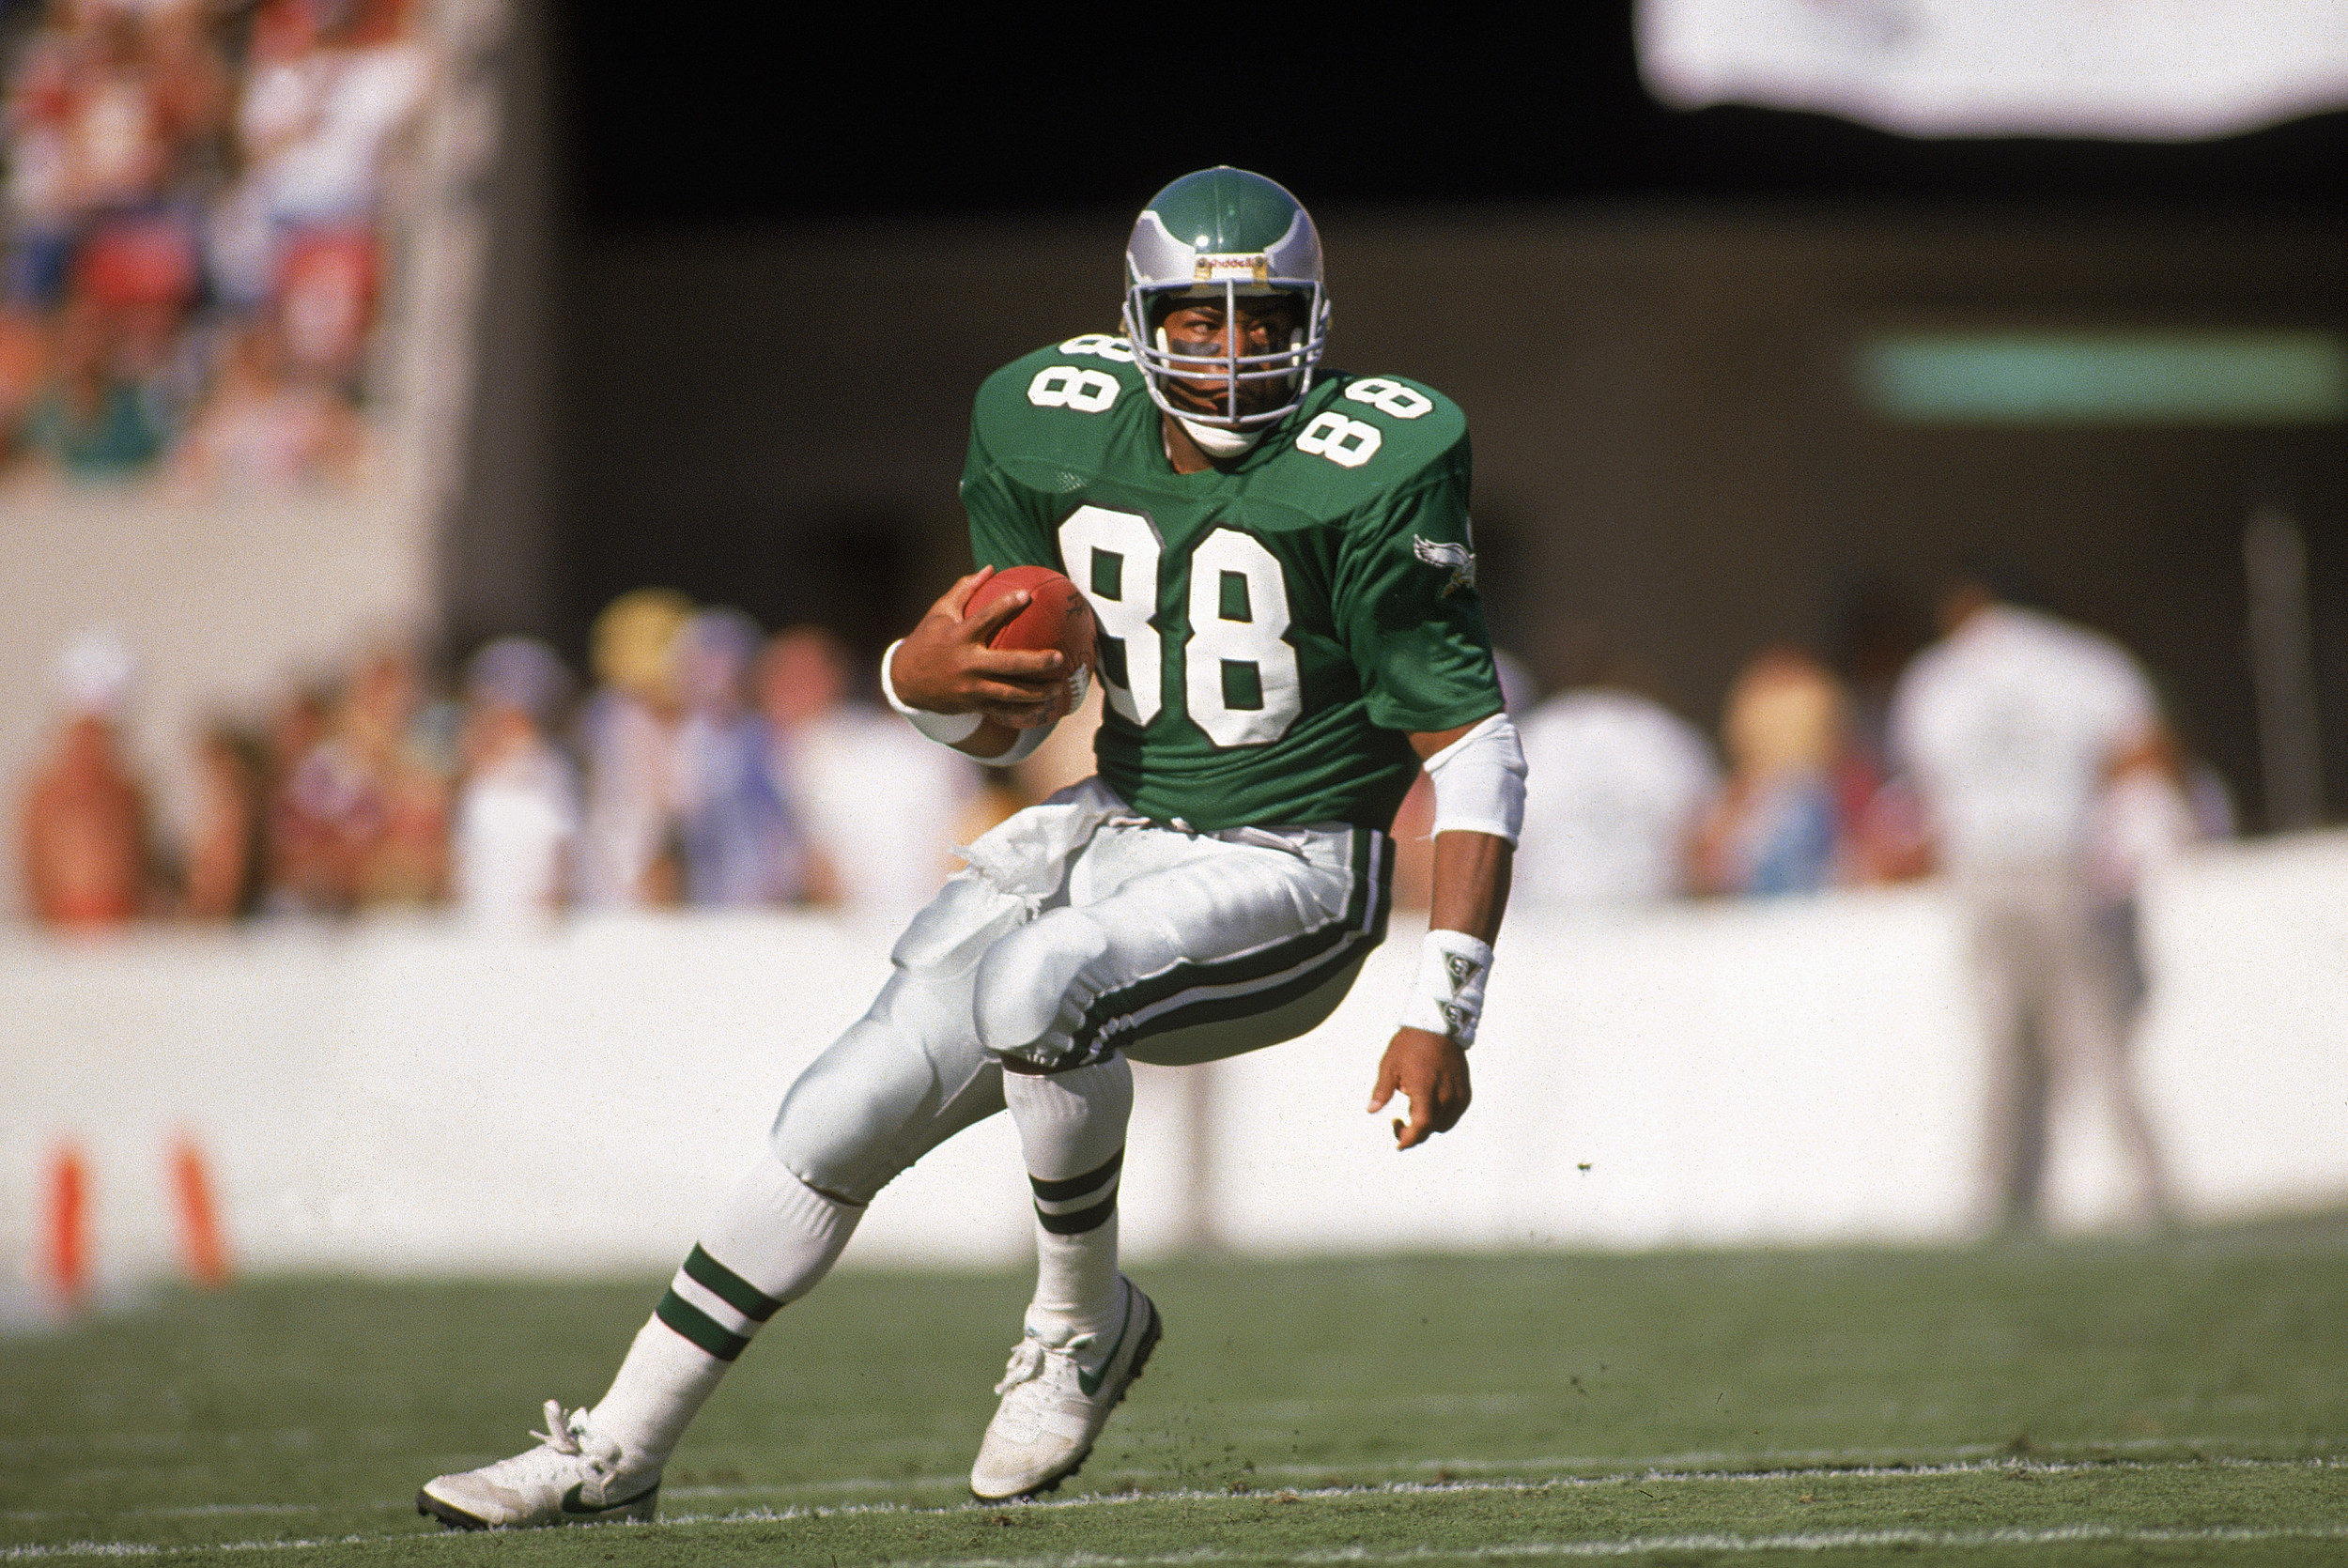 Bring Back The Eagles Kelly Green Uniforms - Permanently!